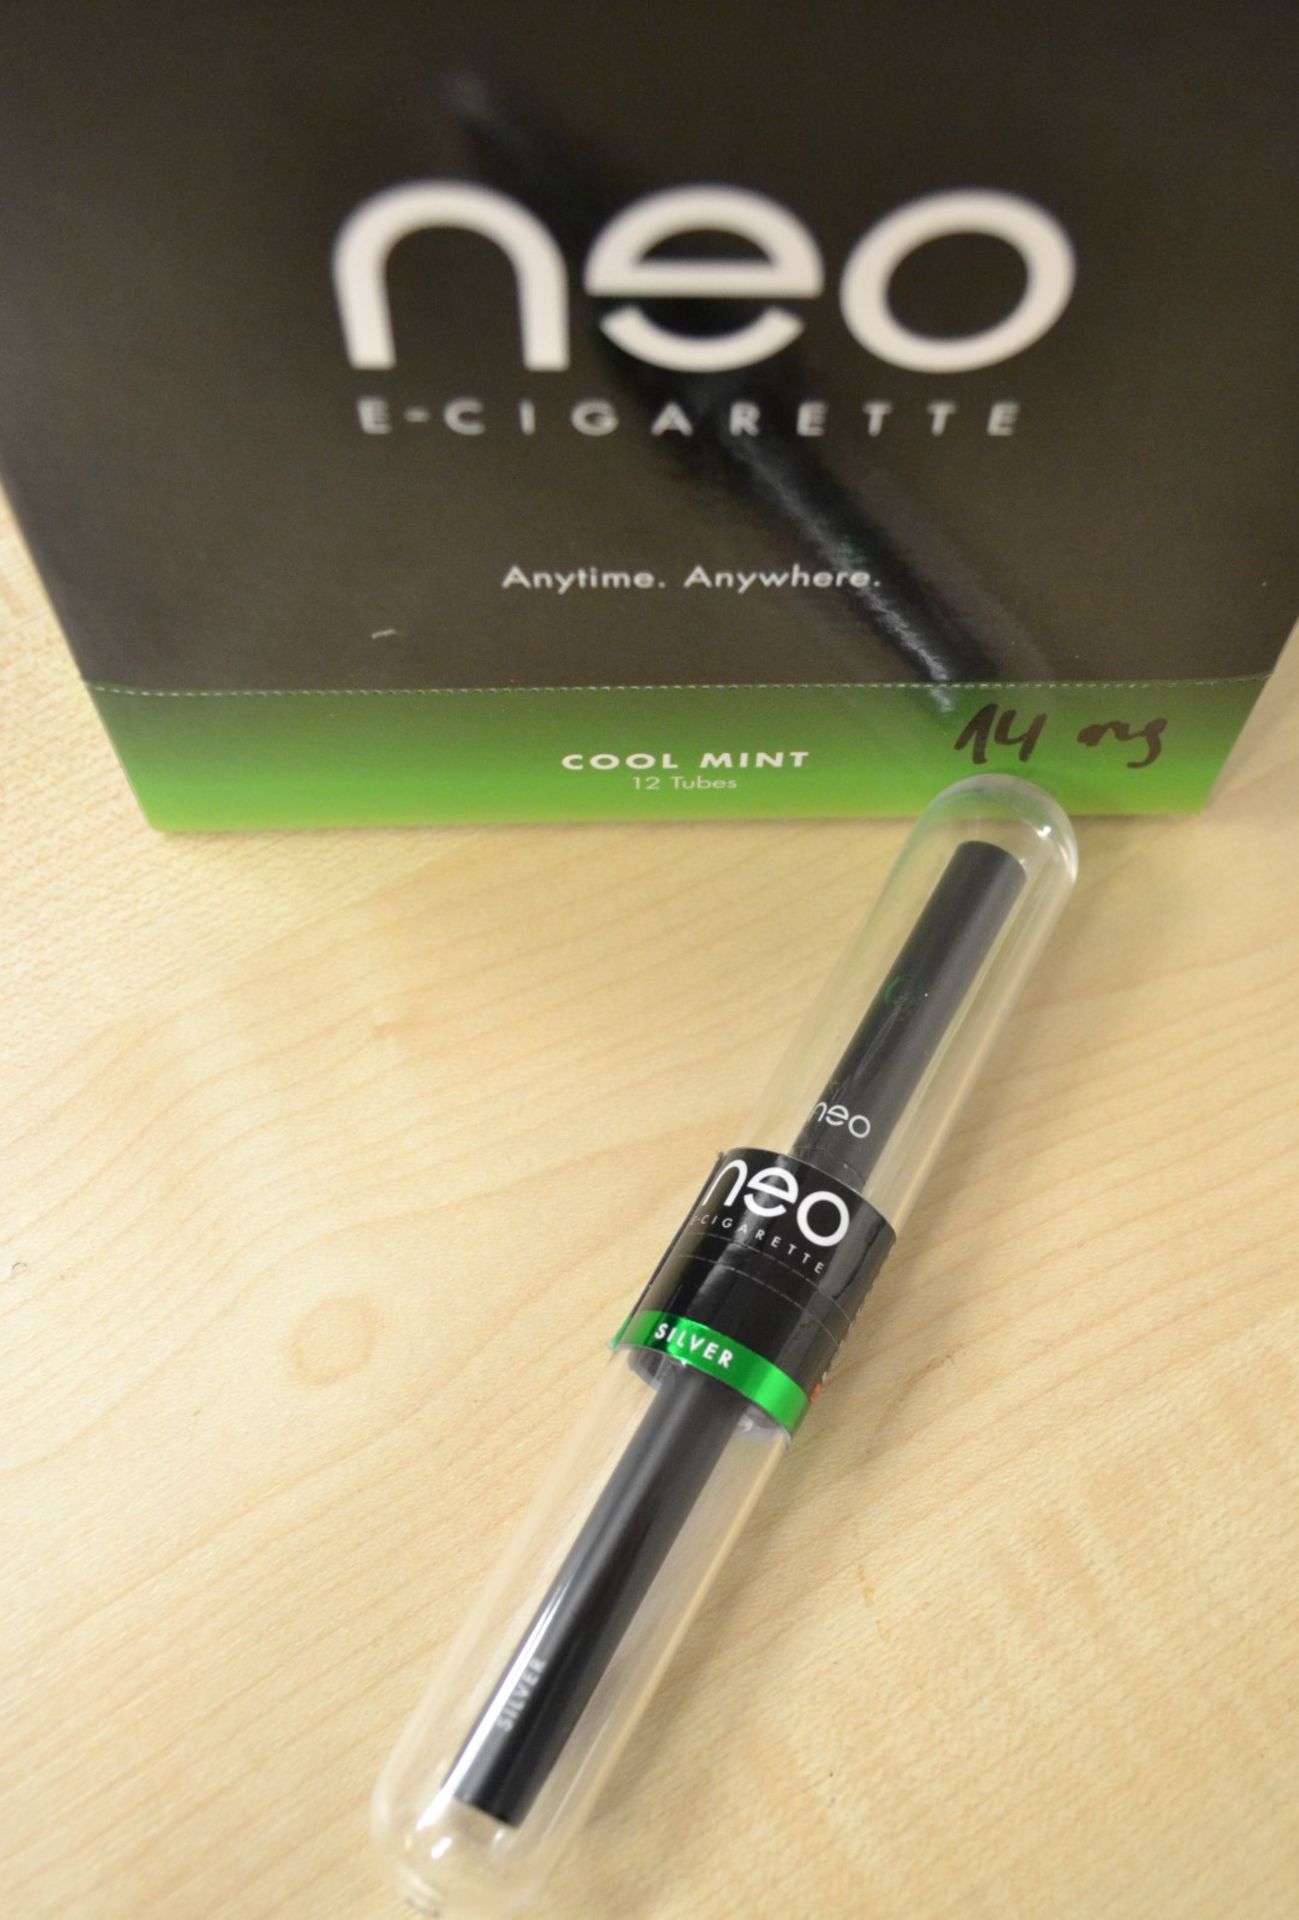 60 x Neo E-Cigarettes Cool Mint Disposable Electronic Cigarettes - New & Sealed Stock - CL185 - Ref: - Image 12 of 13